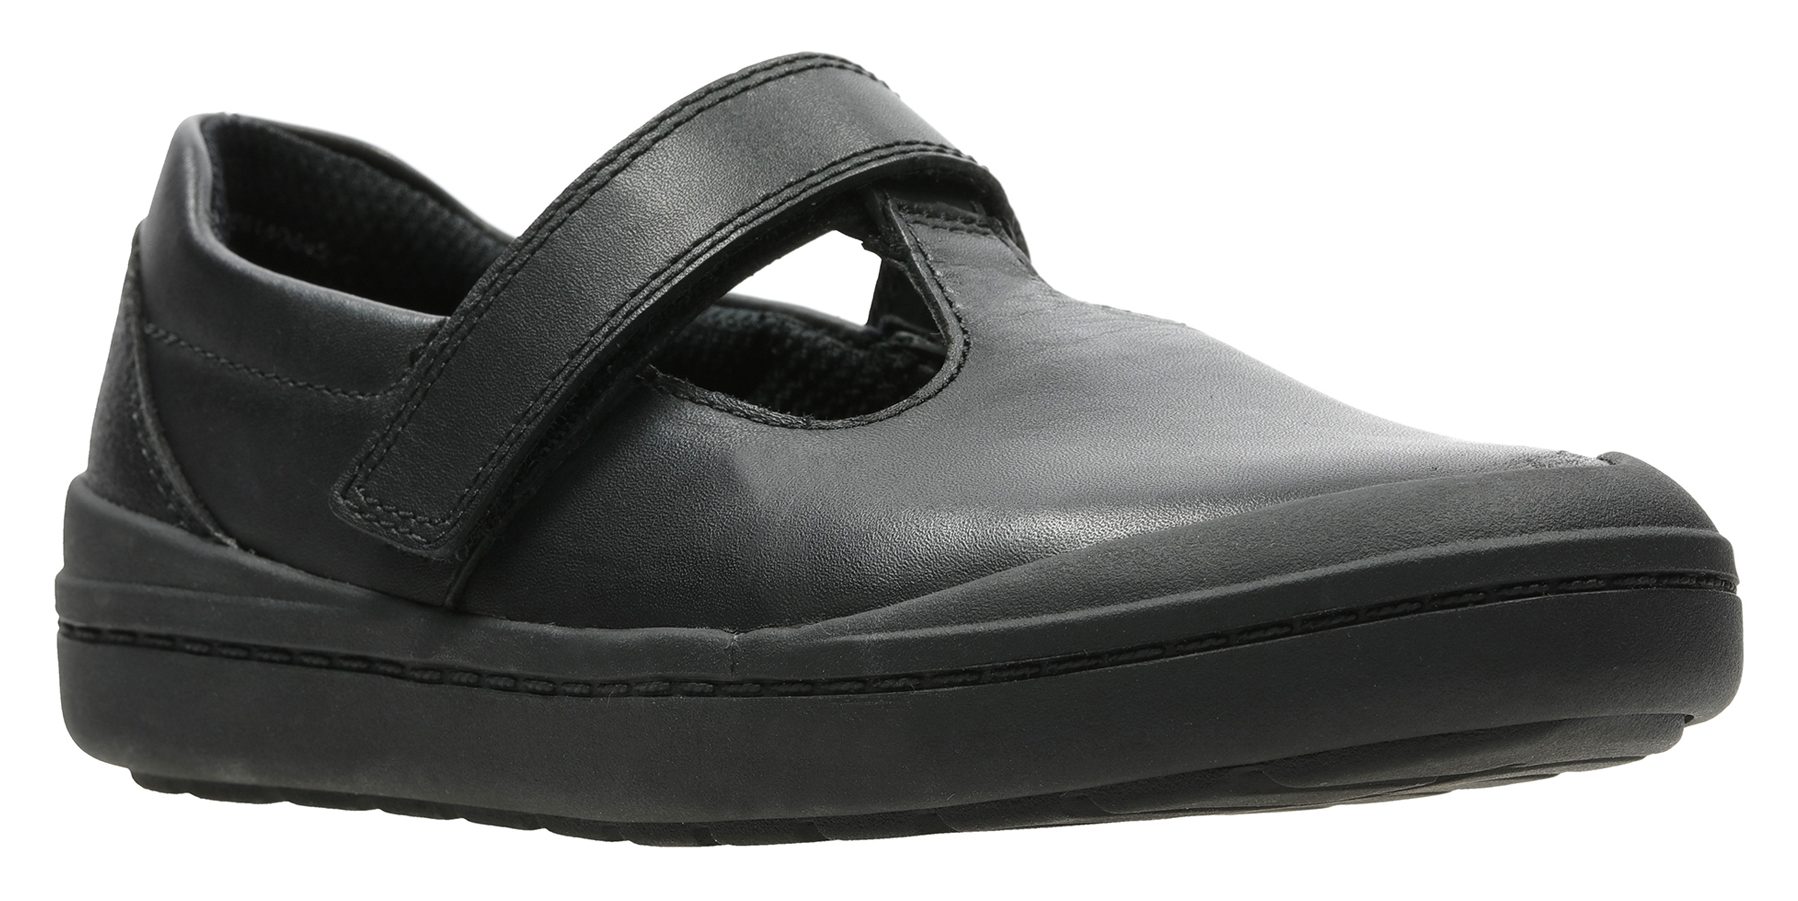 Clarks Rock Move Toddler Black Leather 26141556 - Girls School Shoes ...